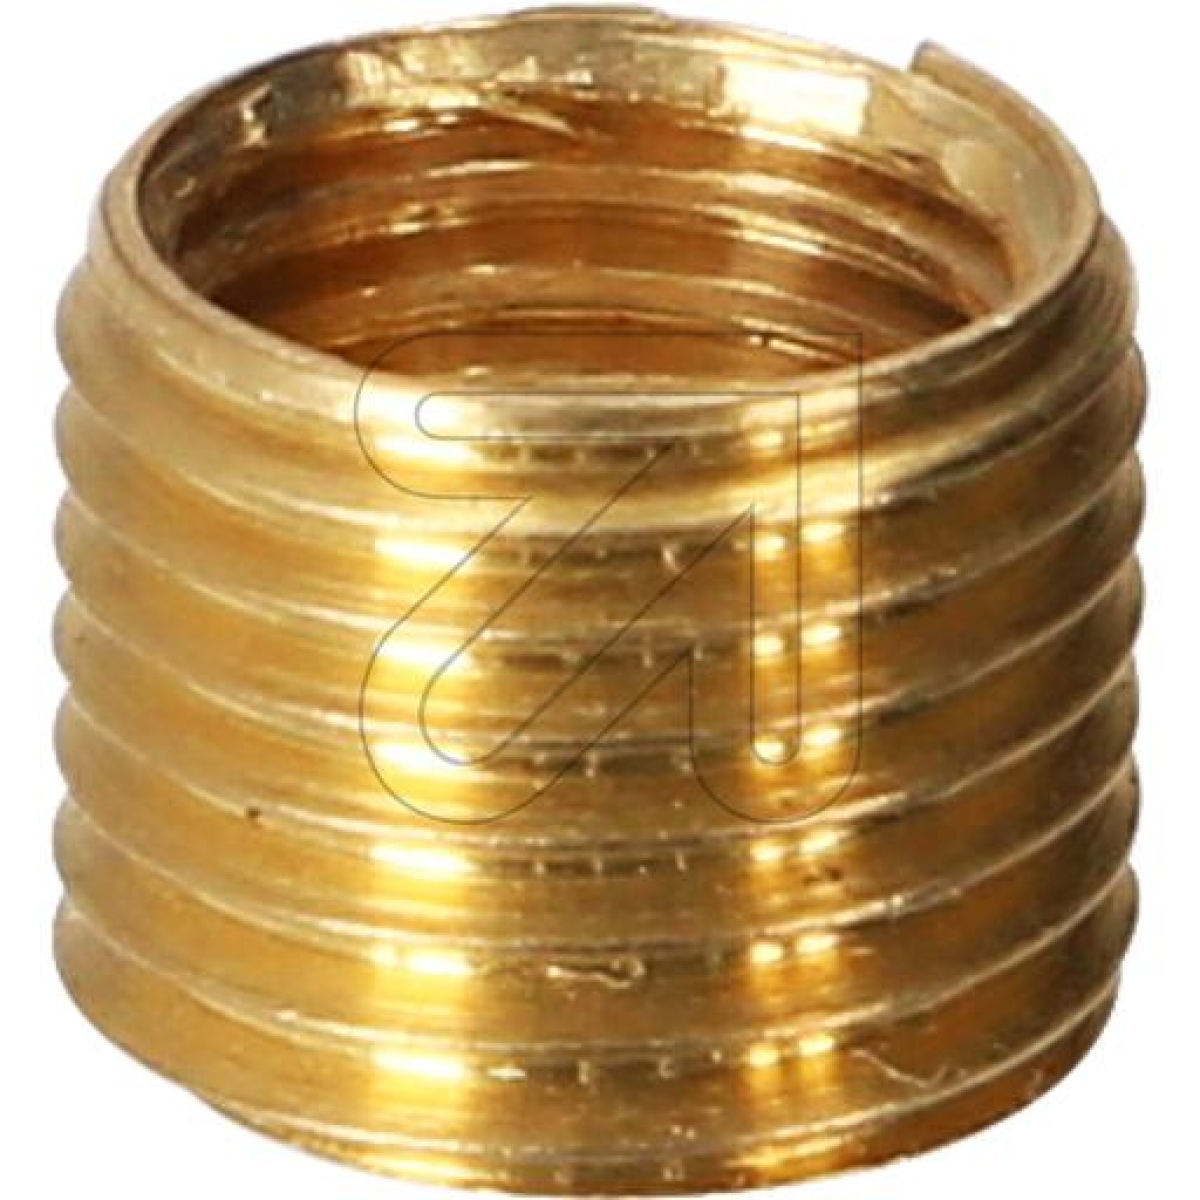 D. W. BendlerReducing piece, raw brass M10a/M8i L8mm 1738.1008.0081.3101-Price for 5 pcs.Article-No: 601495